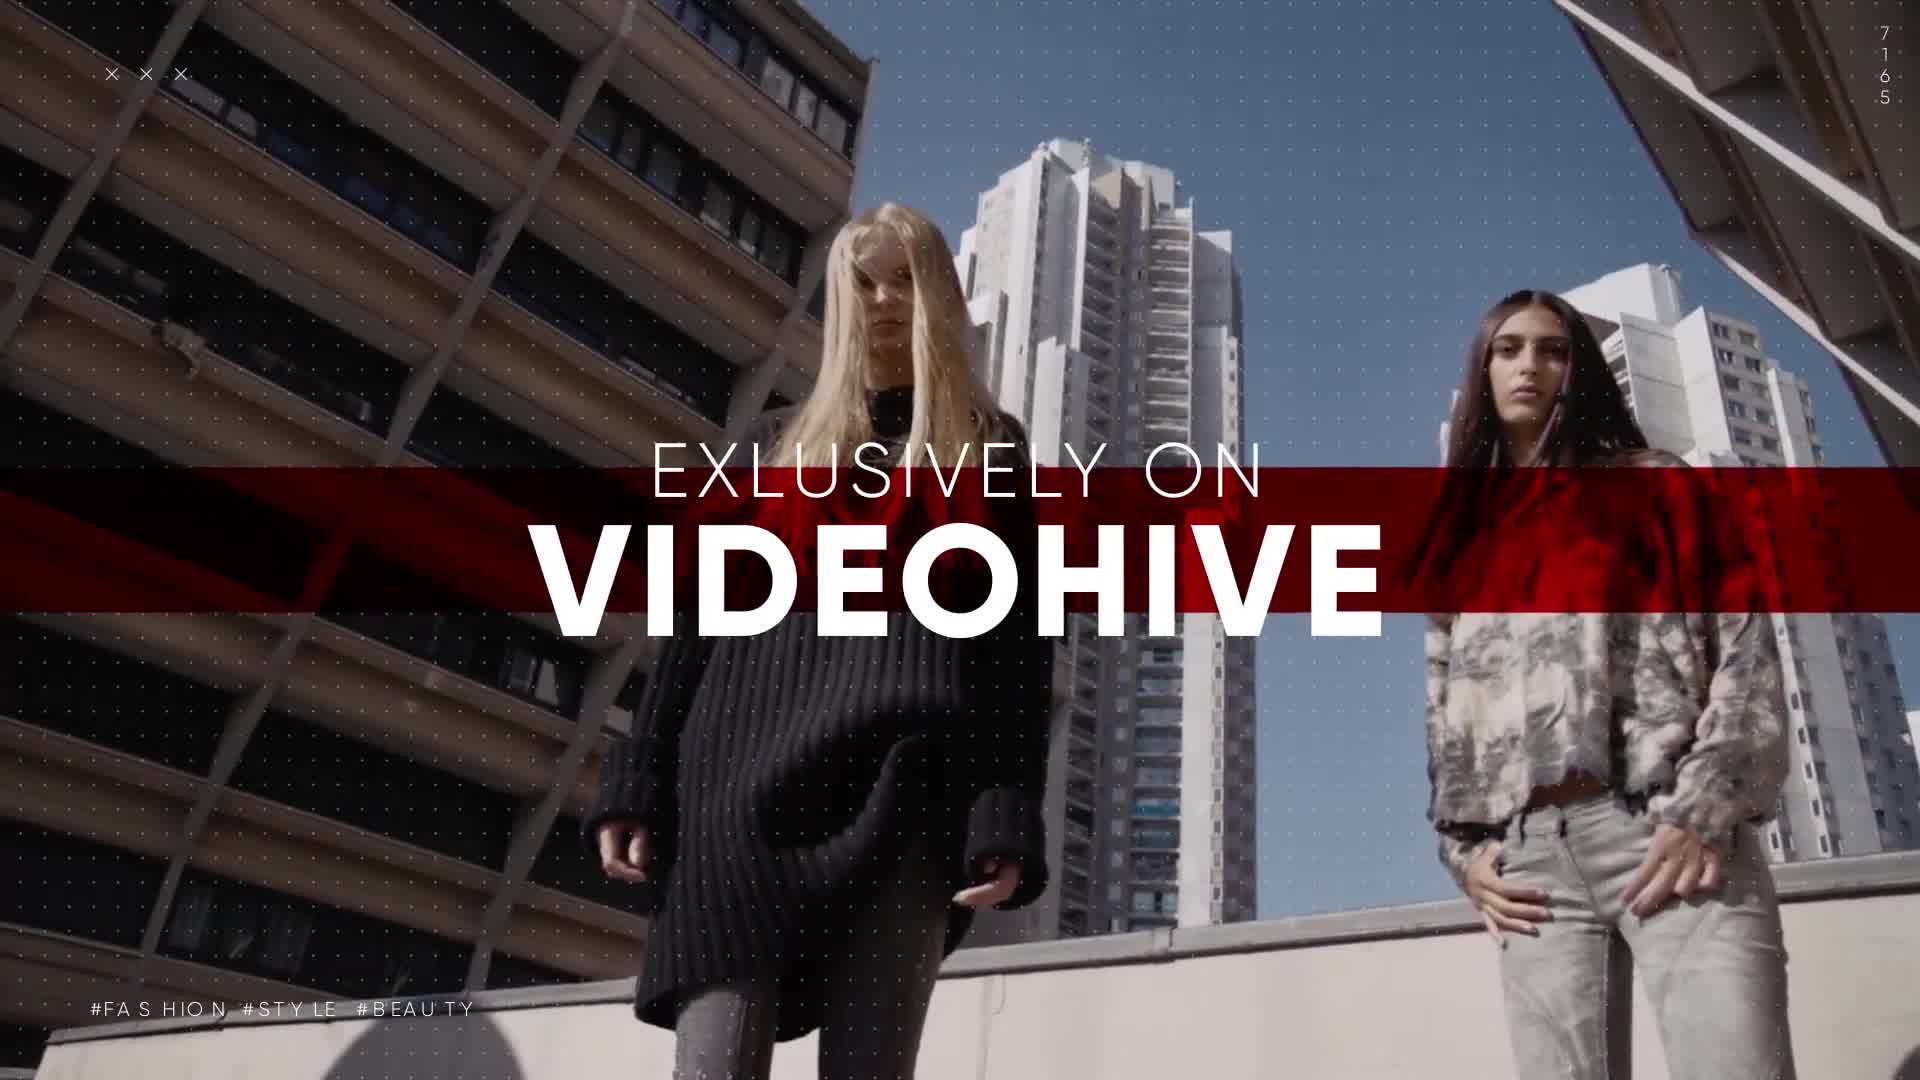 Clean Fashion Opener - Download Videohive 22286629